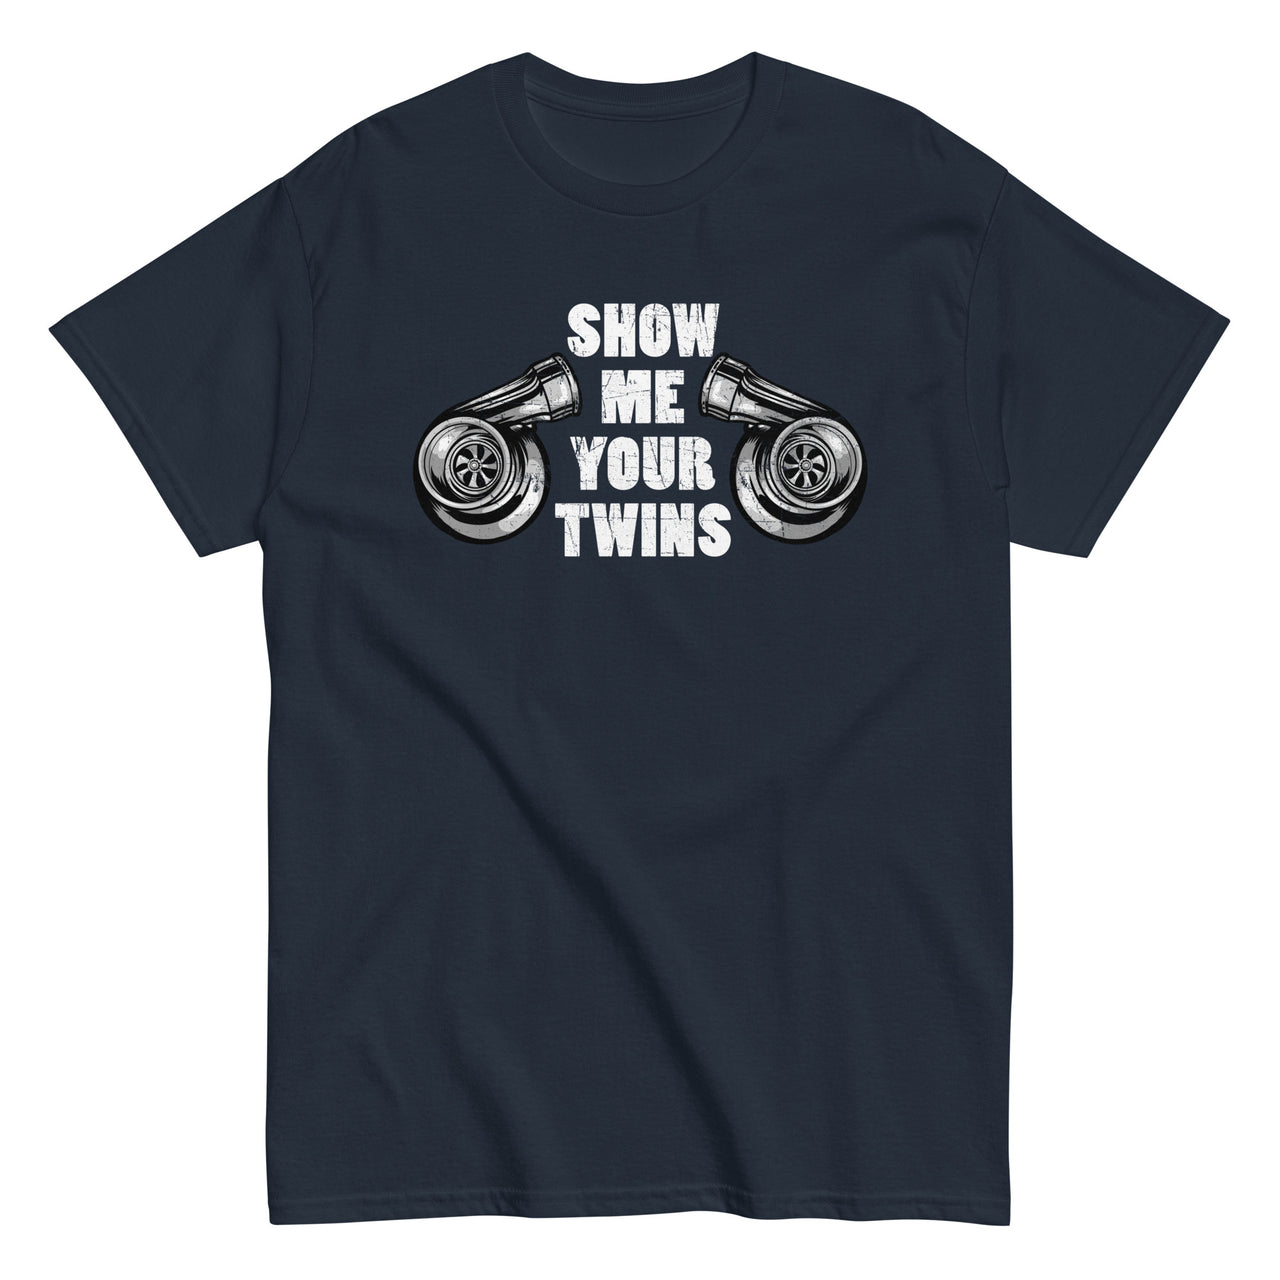 Show Me Your Twins Funny Turbo T-Shirt in navy